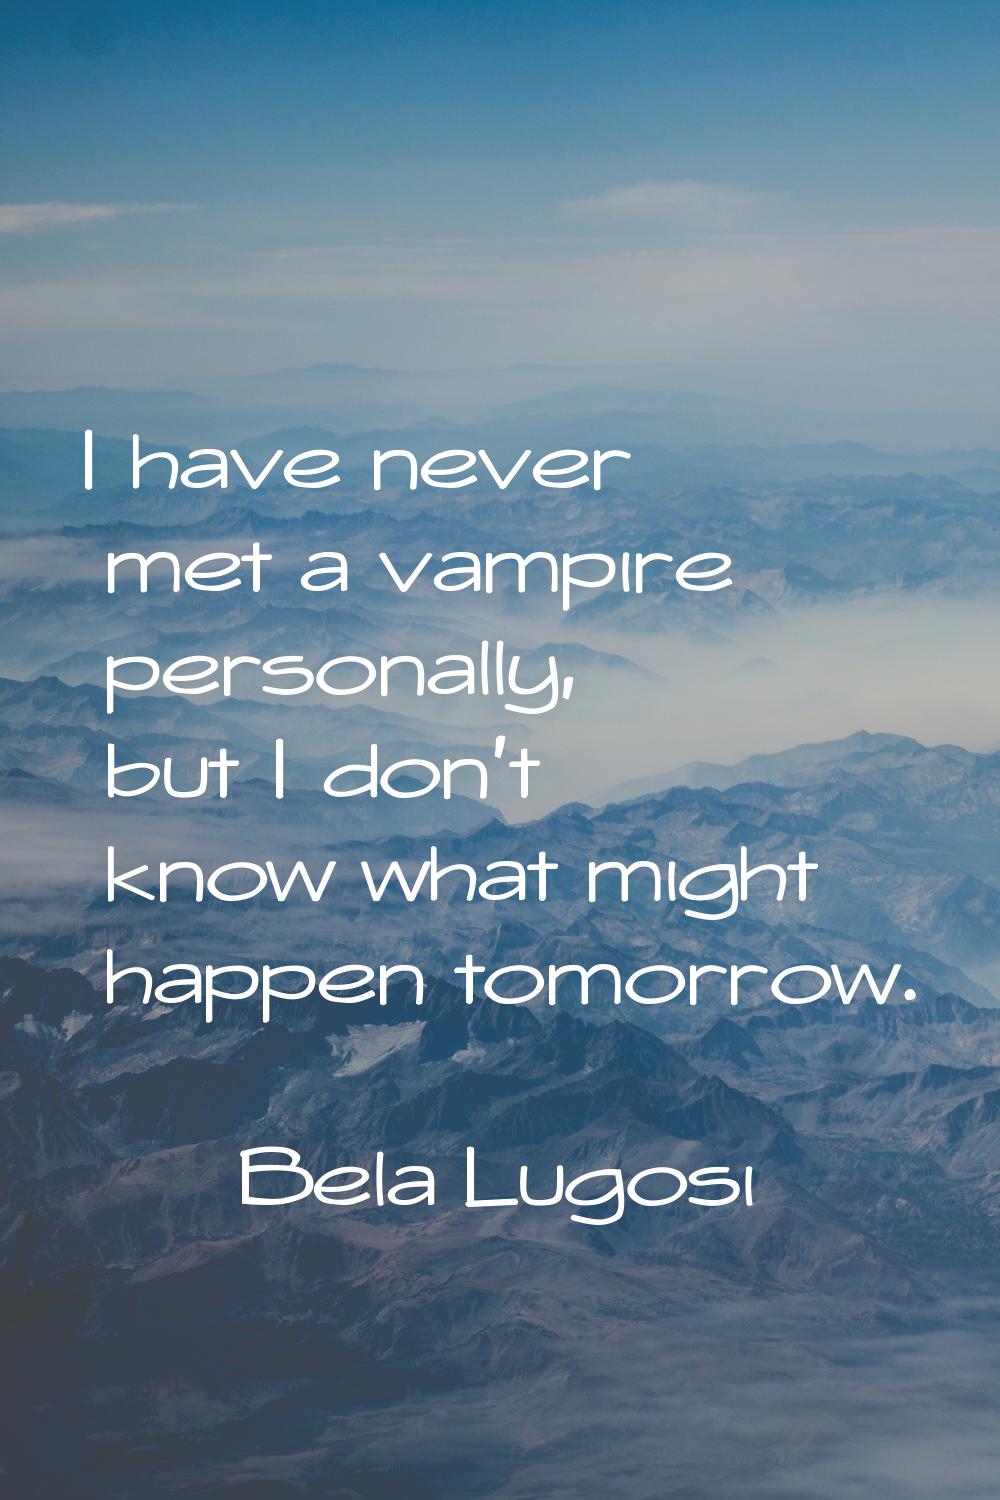 I have never met a vampire personally, but I don't know what might happen tomorrow.